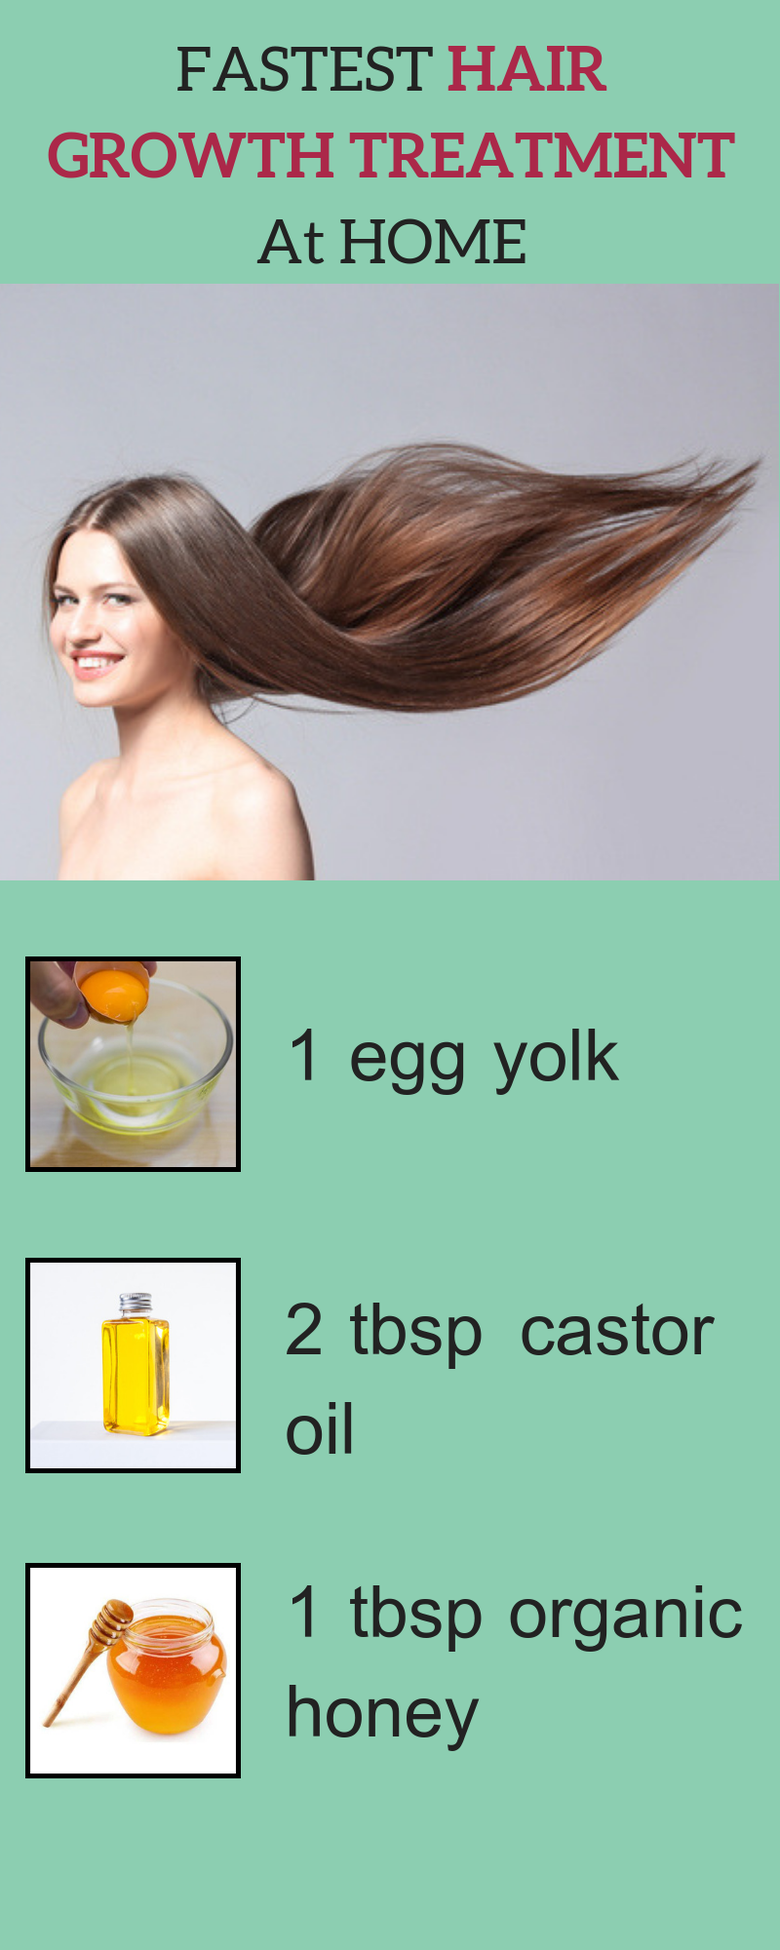 5 steps to fast hair growth | Freelancer